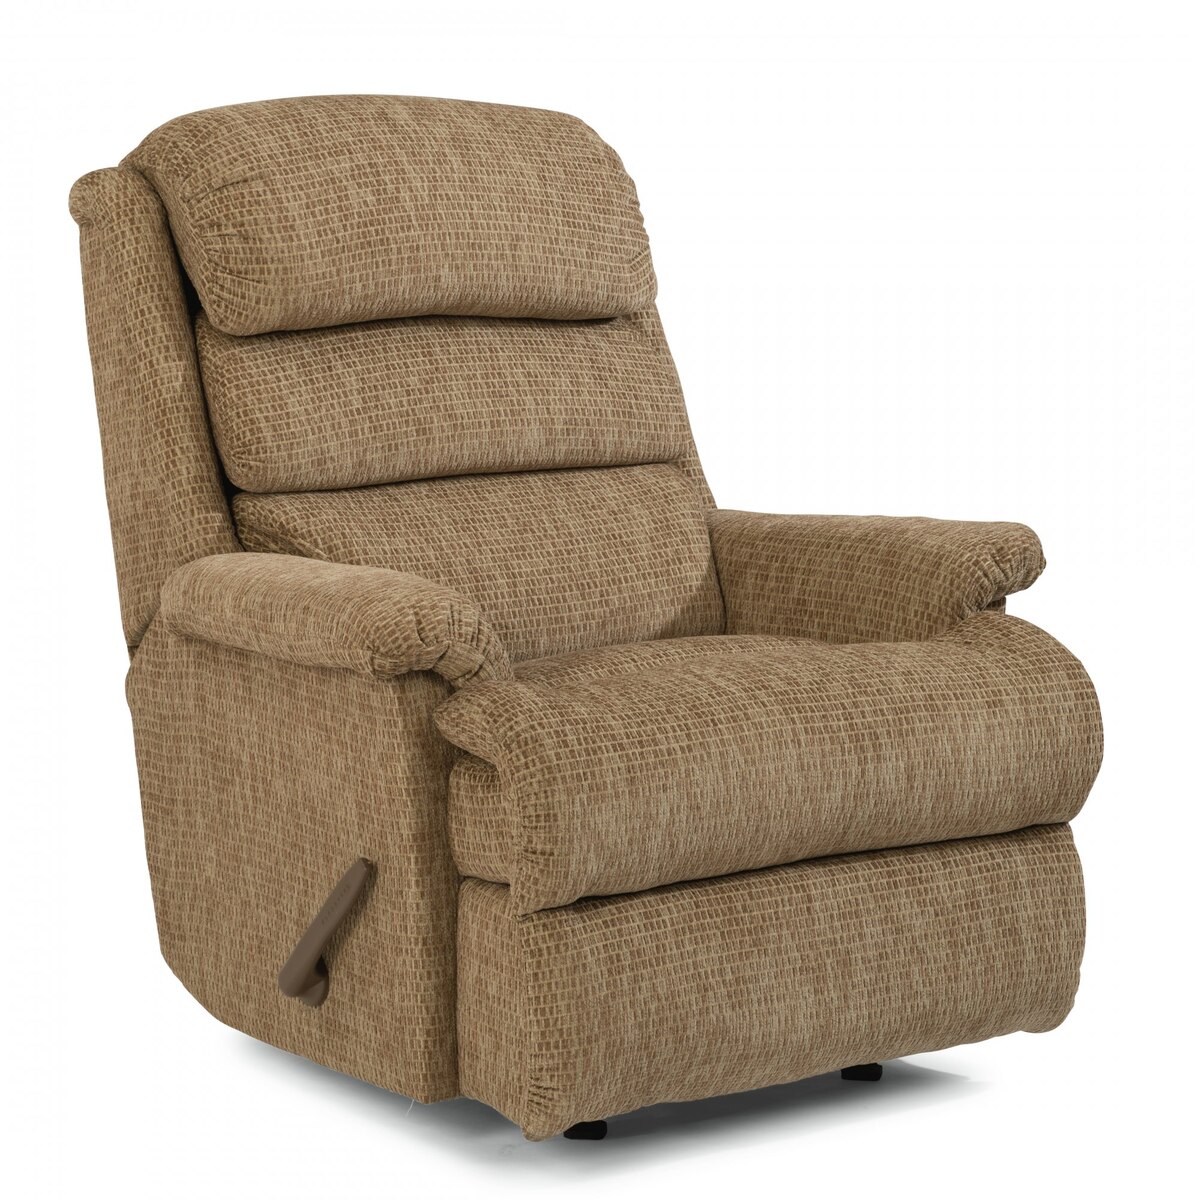 How To Clean A Cloth Recliner Chair